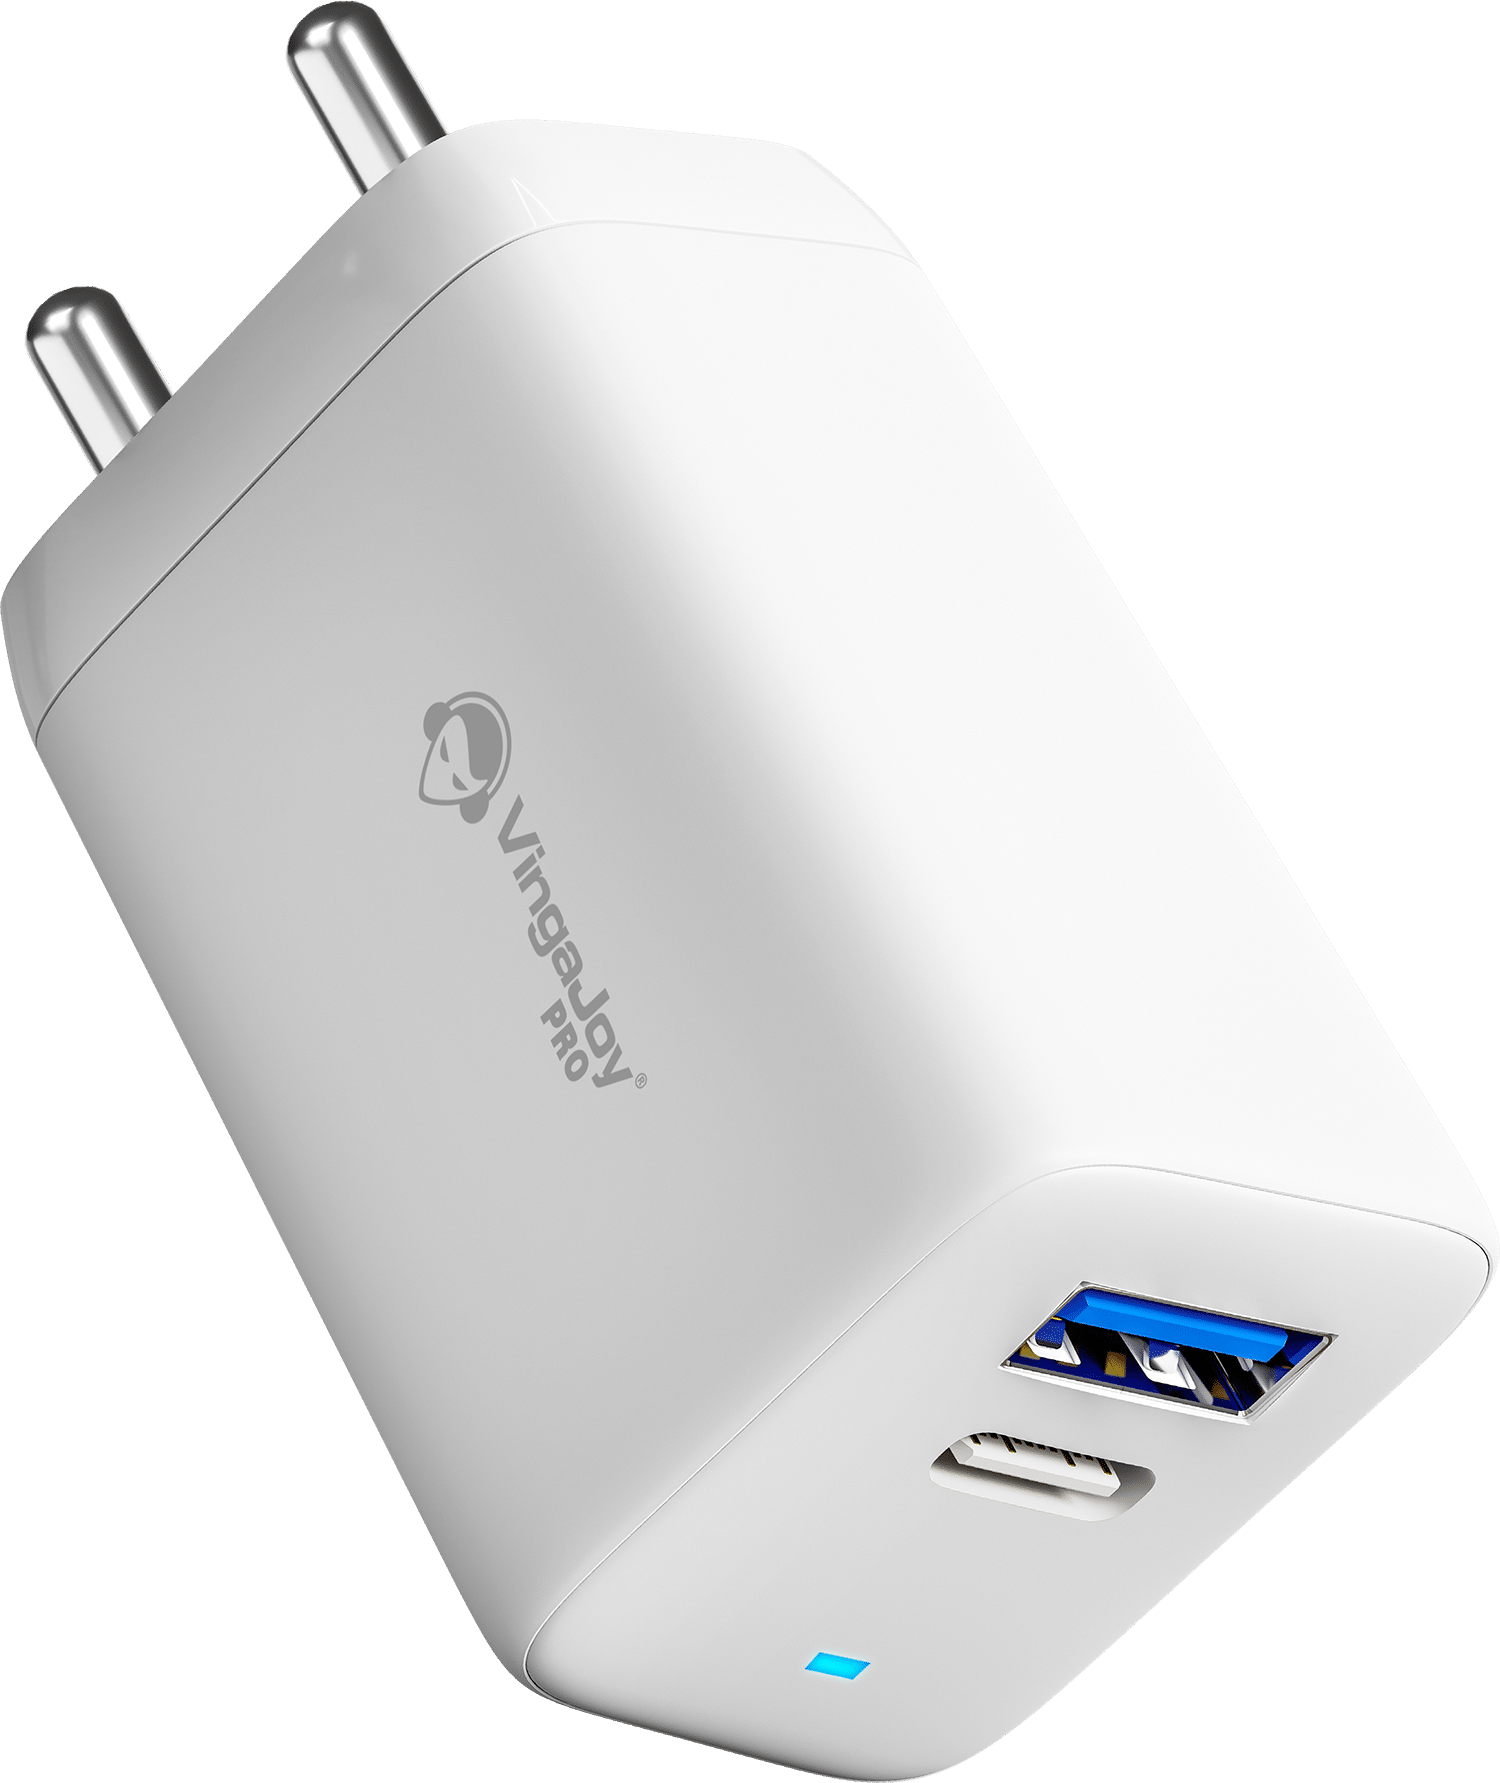 A Portable 65 Watt Fast Charger